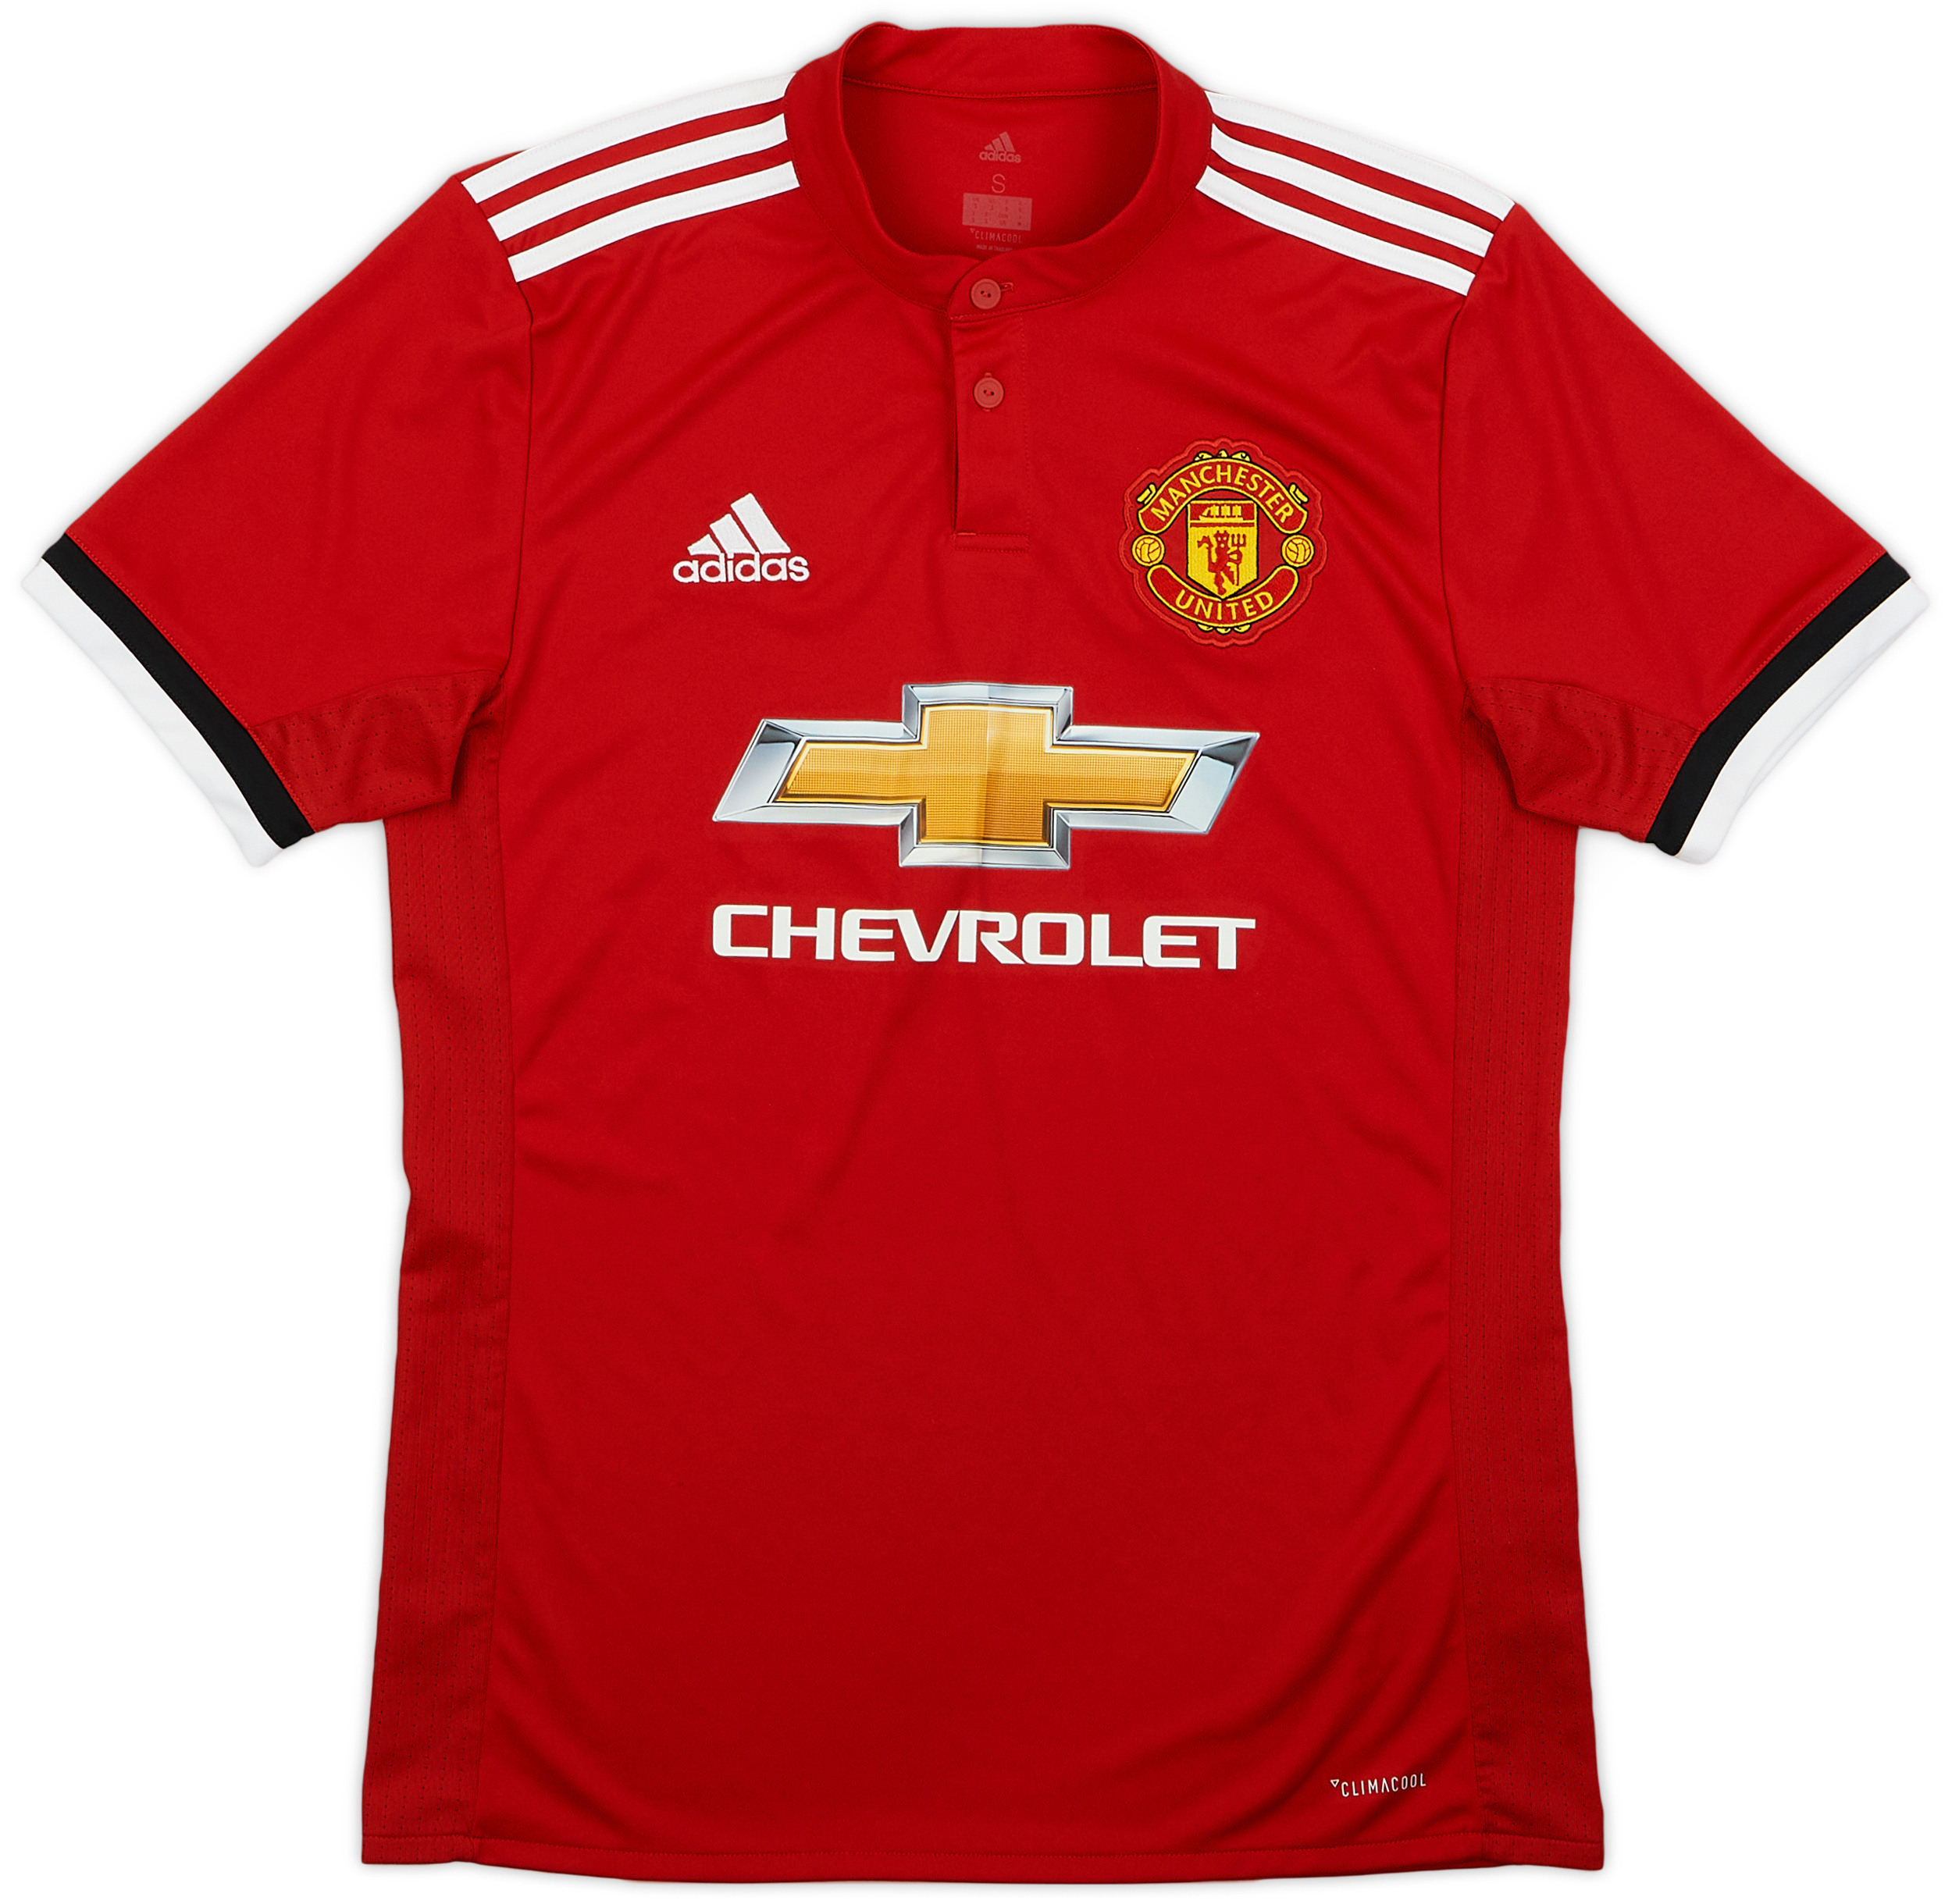 2017-18 Manchester United Home Shirt - 8/10 - ()